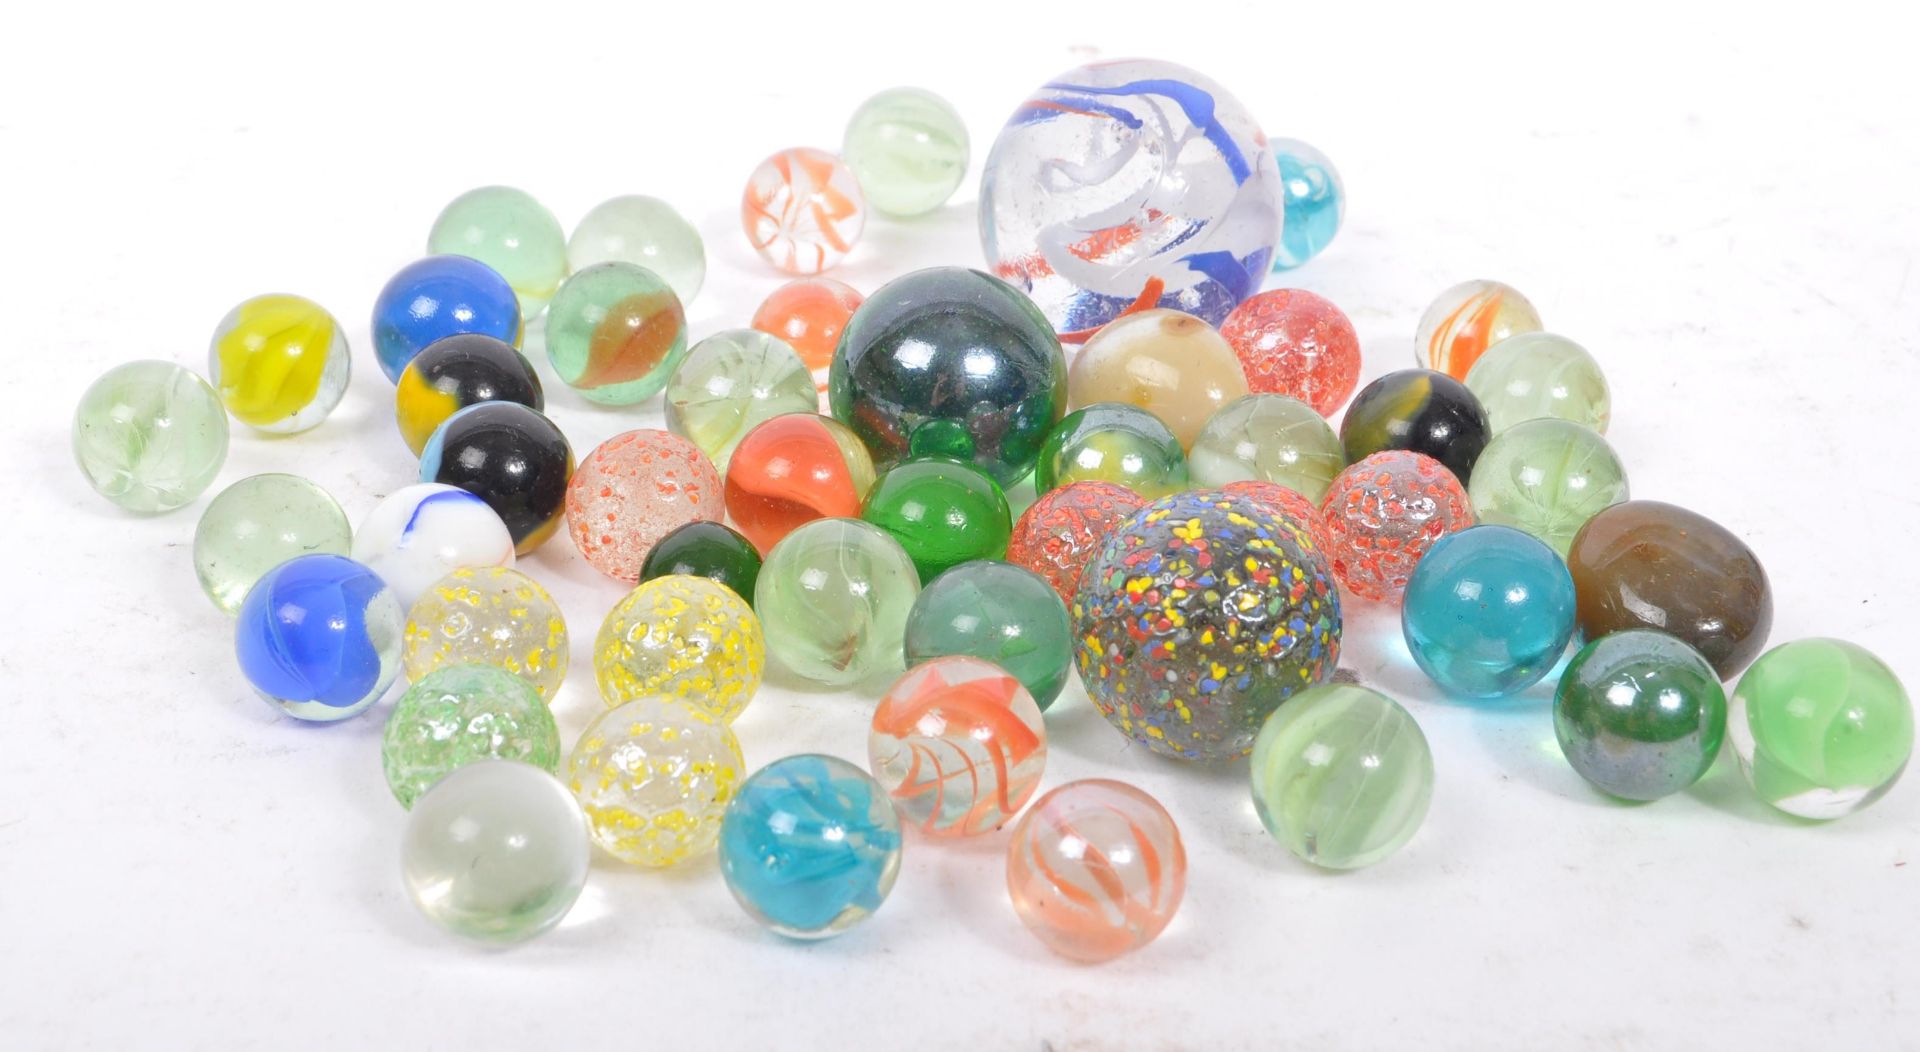 COLLECTION OF 20TH CENTURY GLASS MARBLES - Image 4 of 4